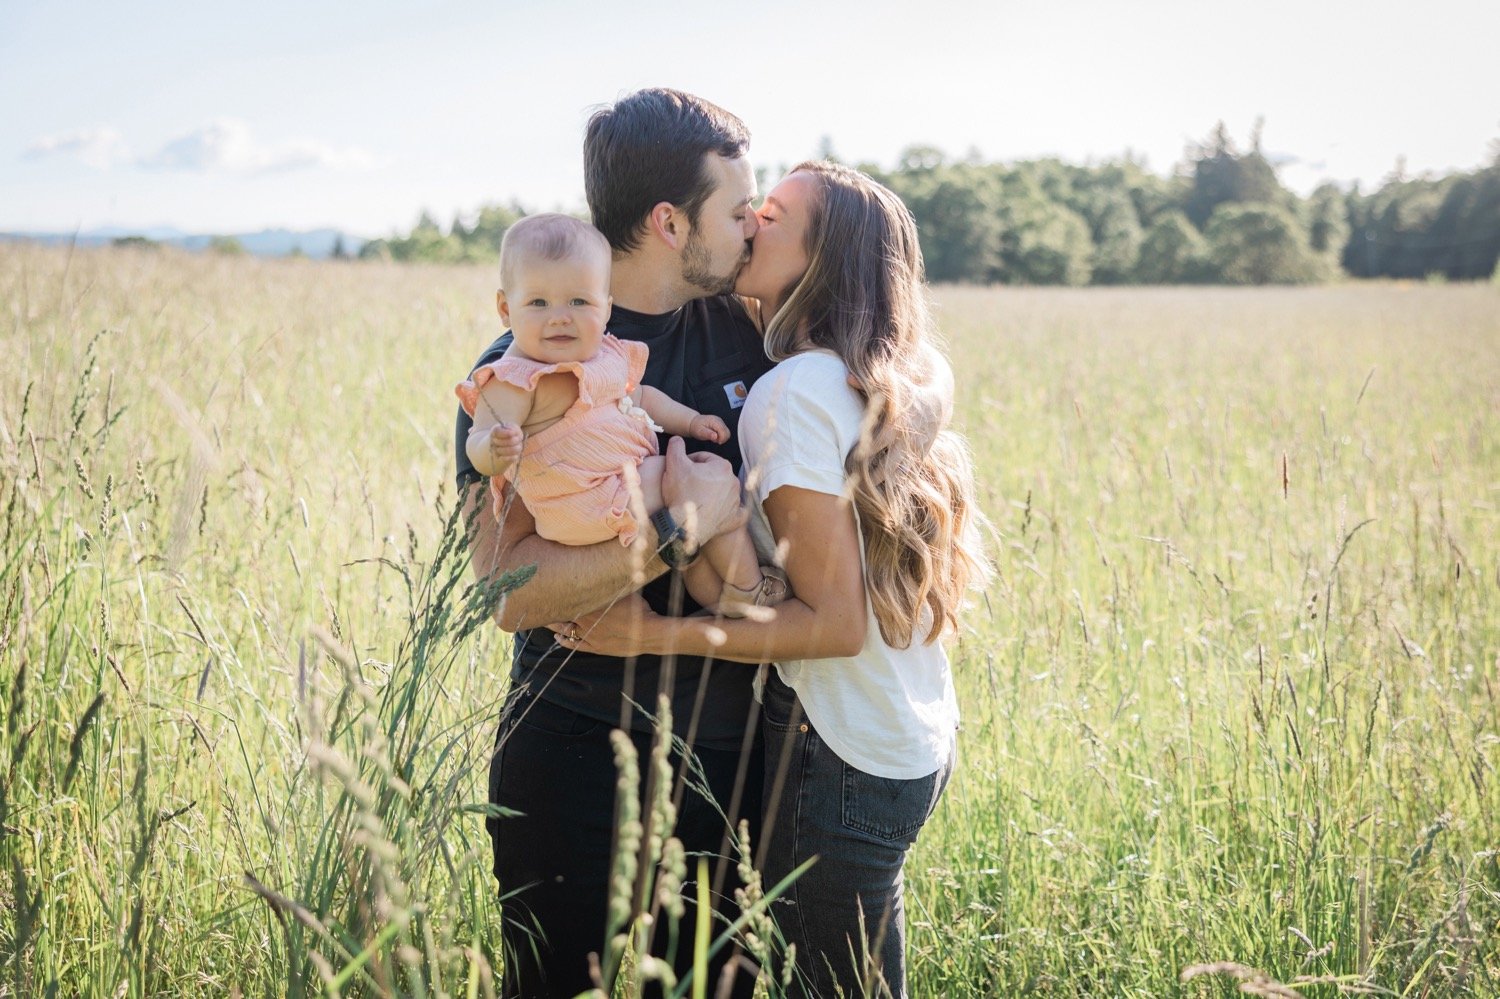 06_Portland Family Photo Session10_Woman in white shirt and kisses man in black shirt holding baby in pink dress in grassy field.jpg